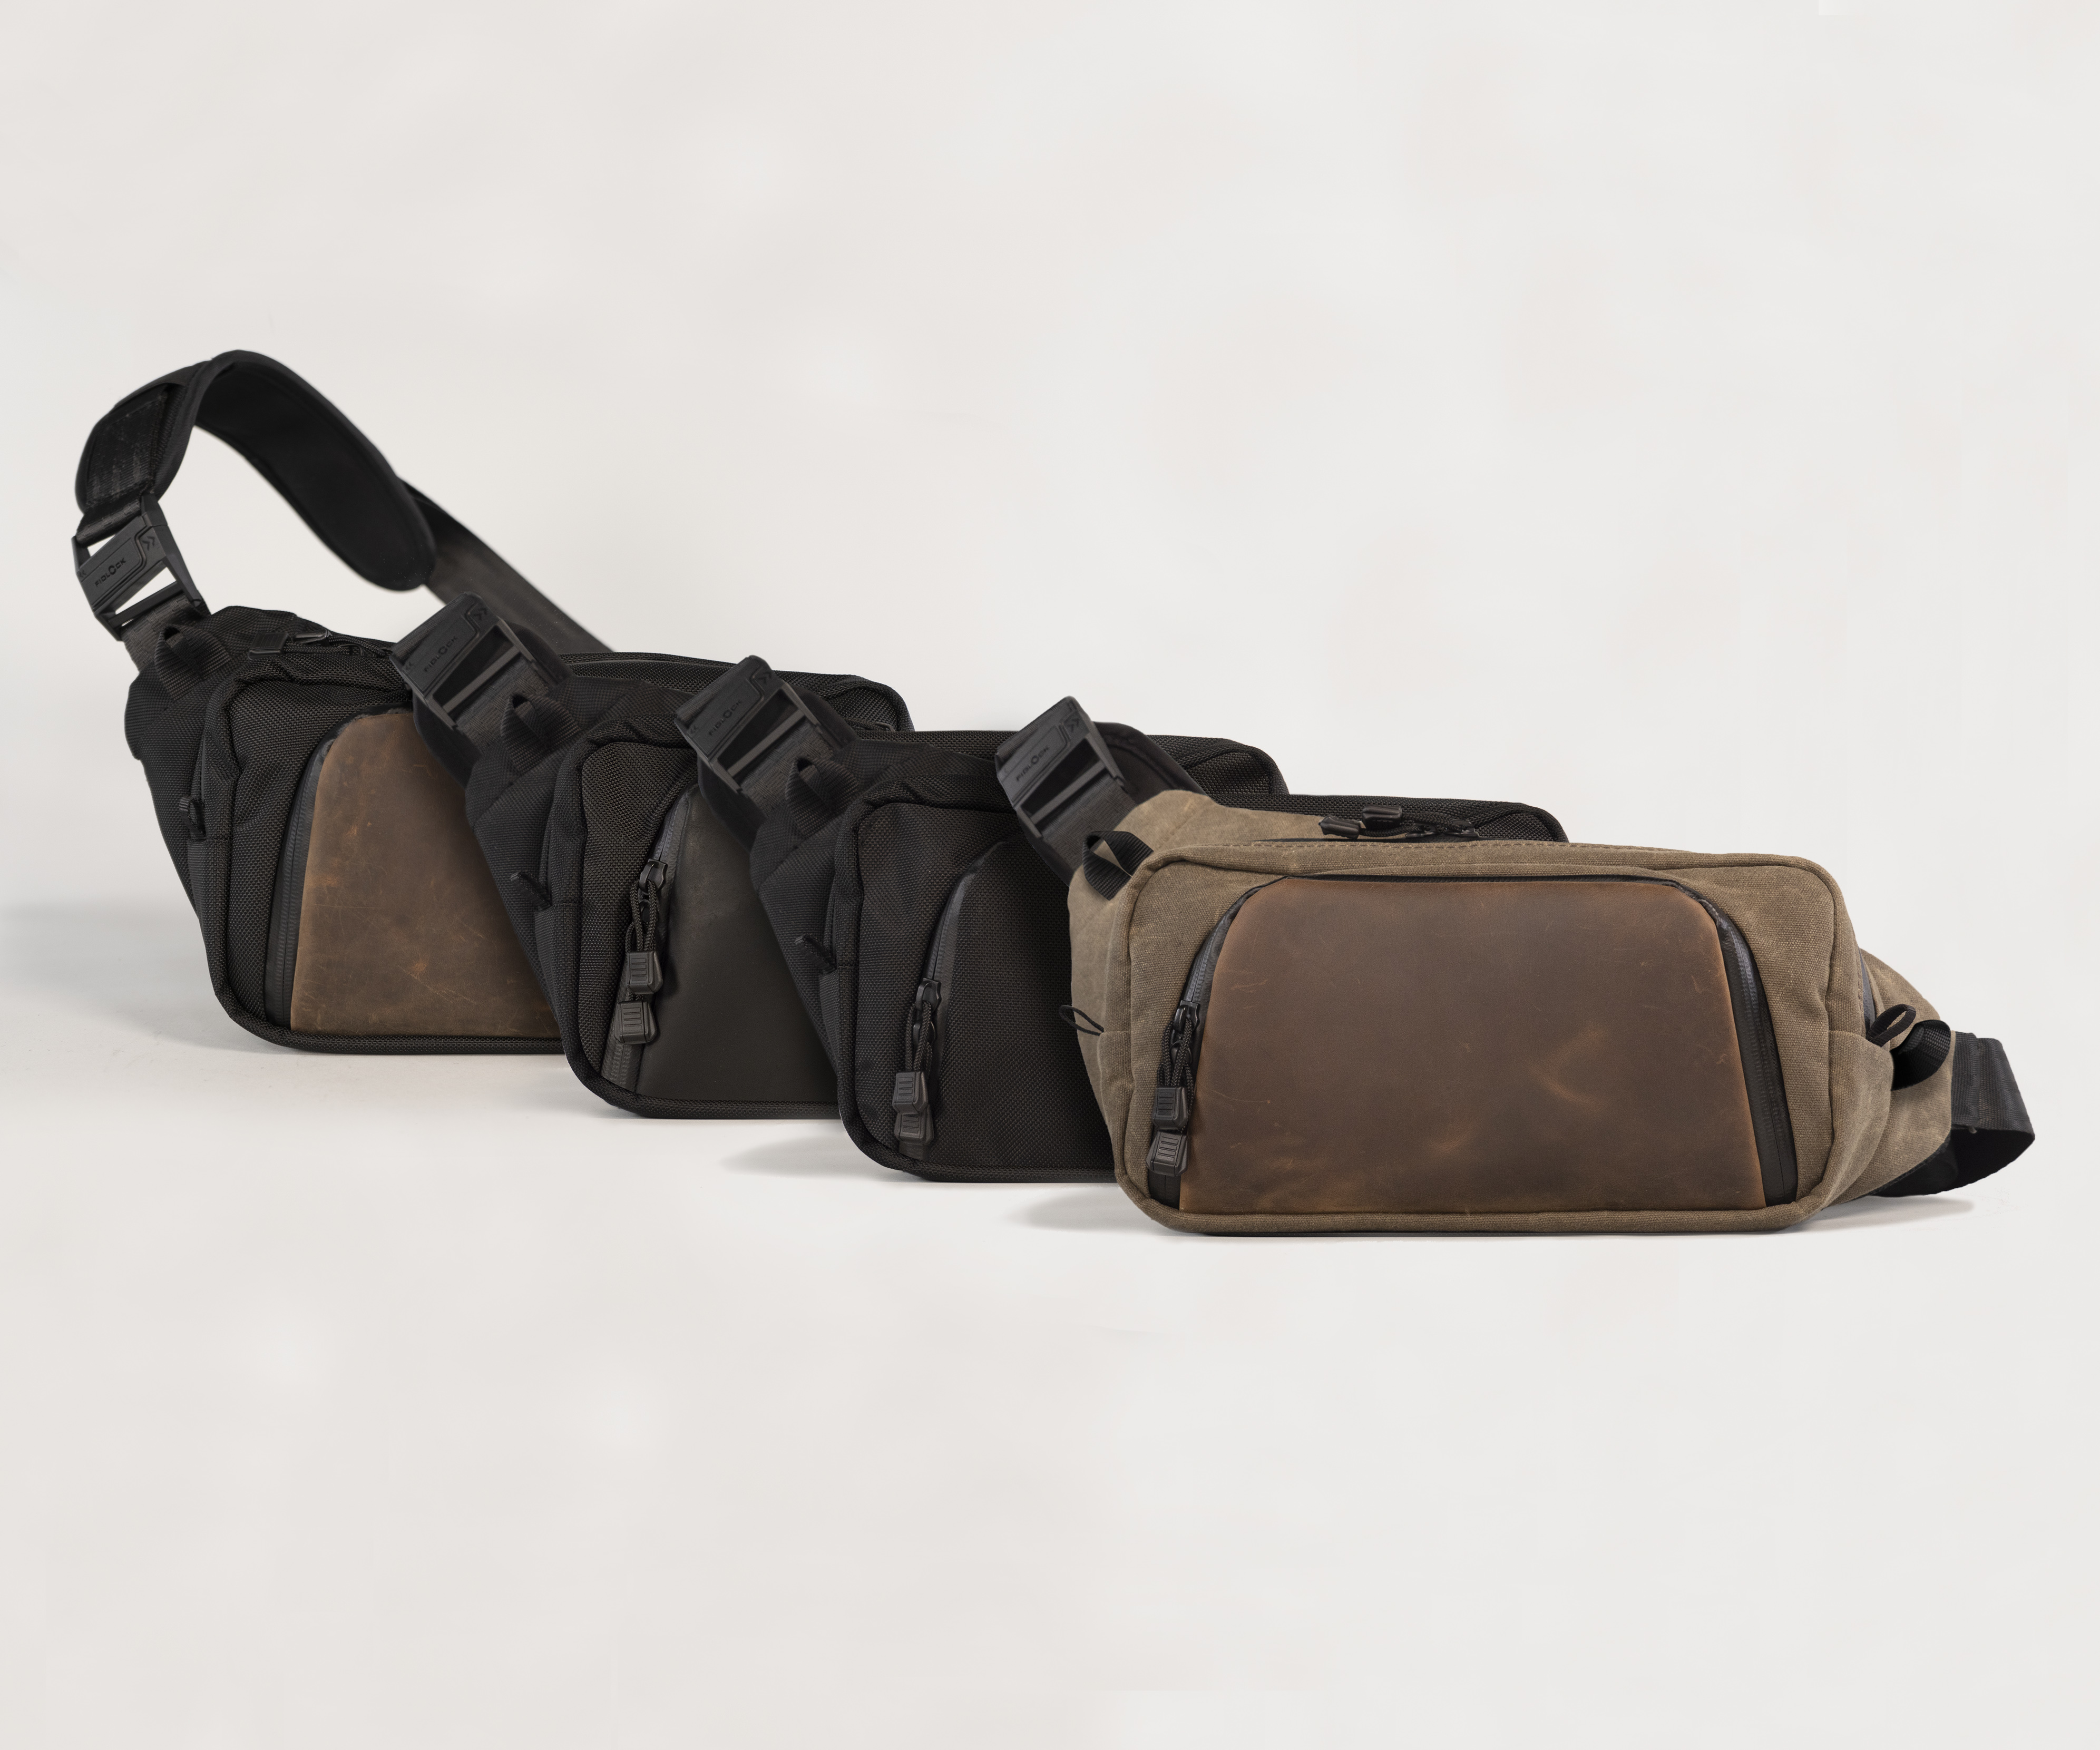 Moto Sling available in four color and material combinations